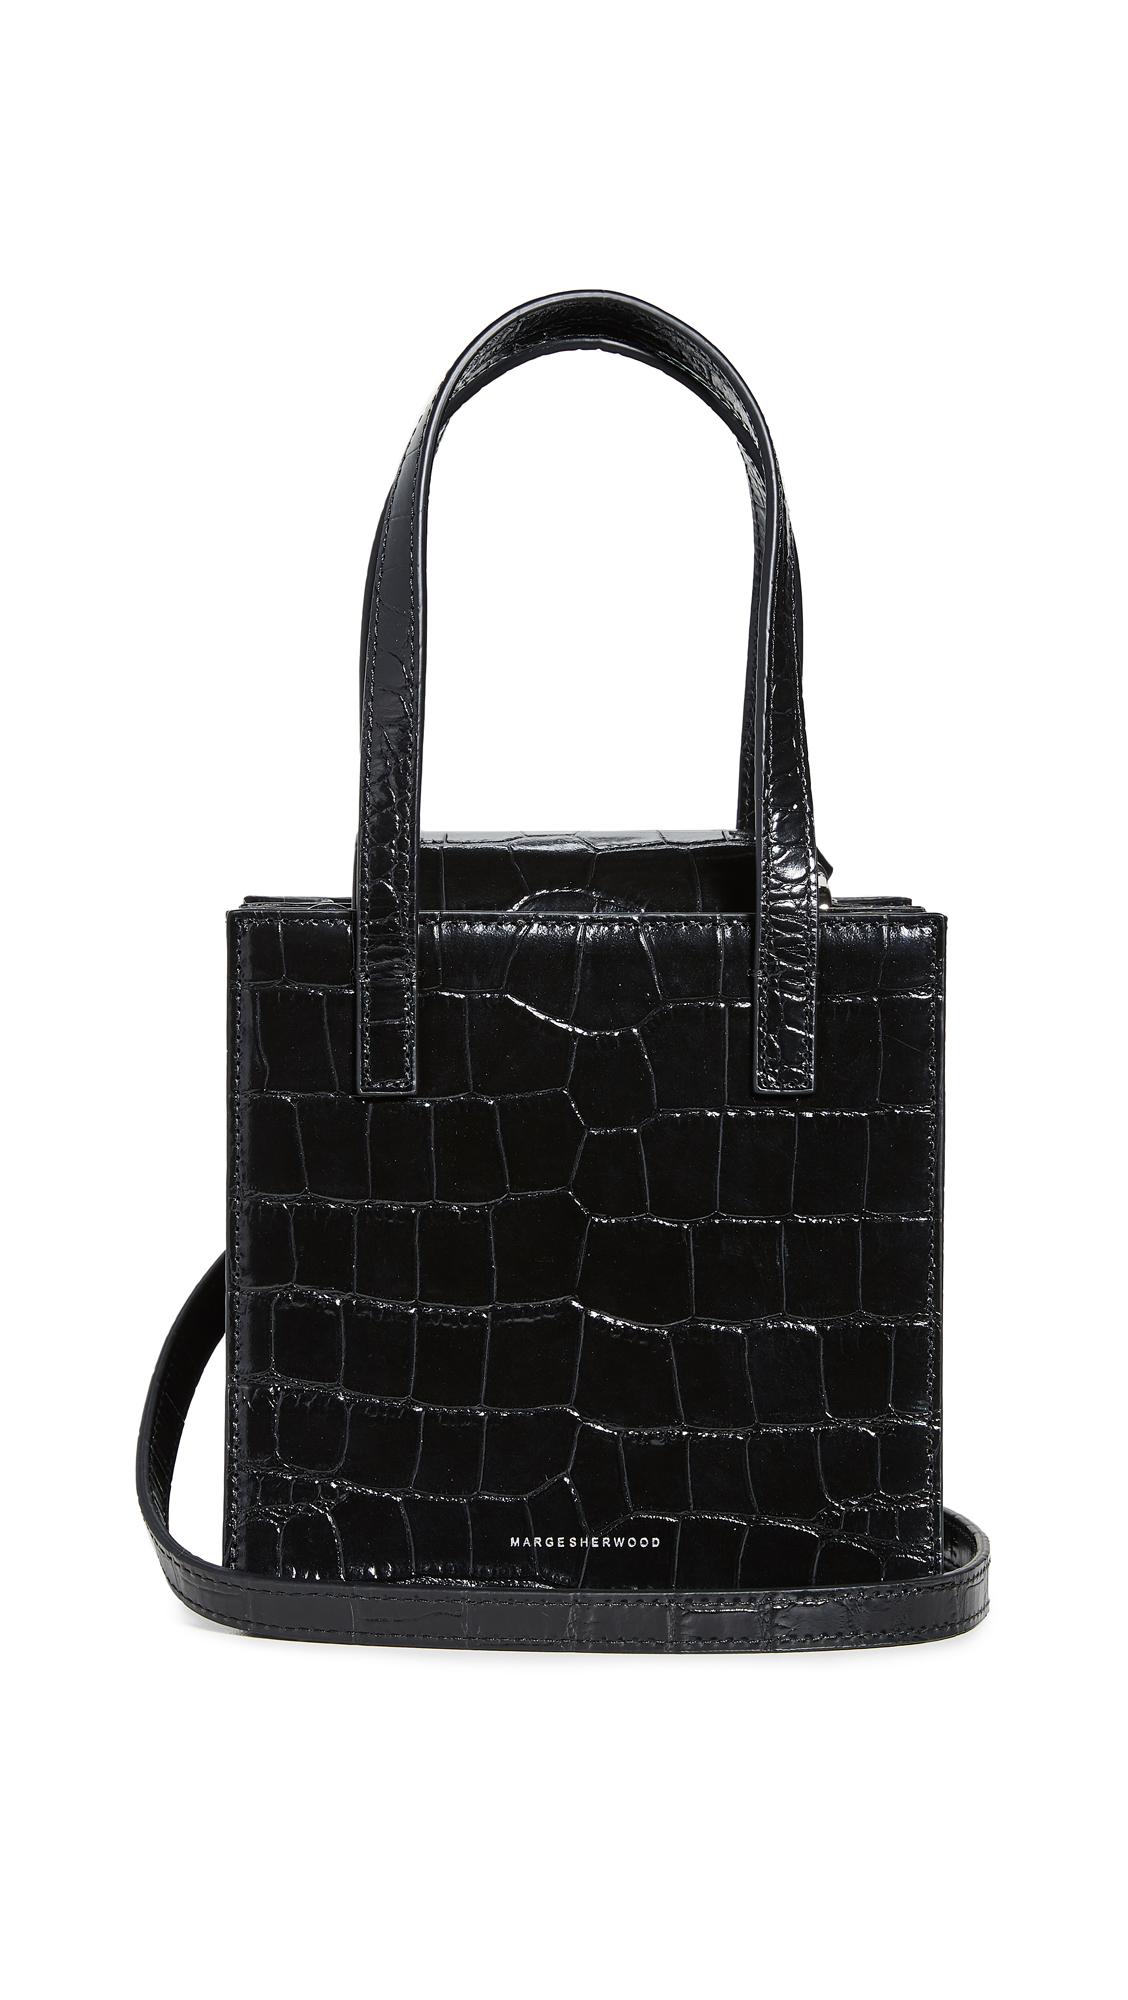 Marge Sherwood Leather Square Tote Bag in Black Croc (Black) - Lyst